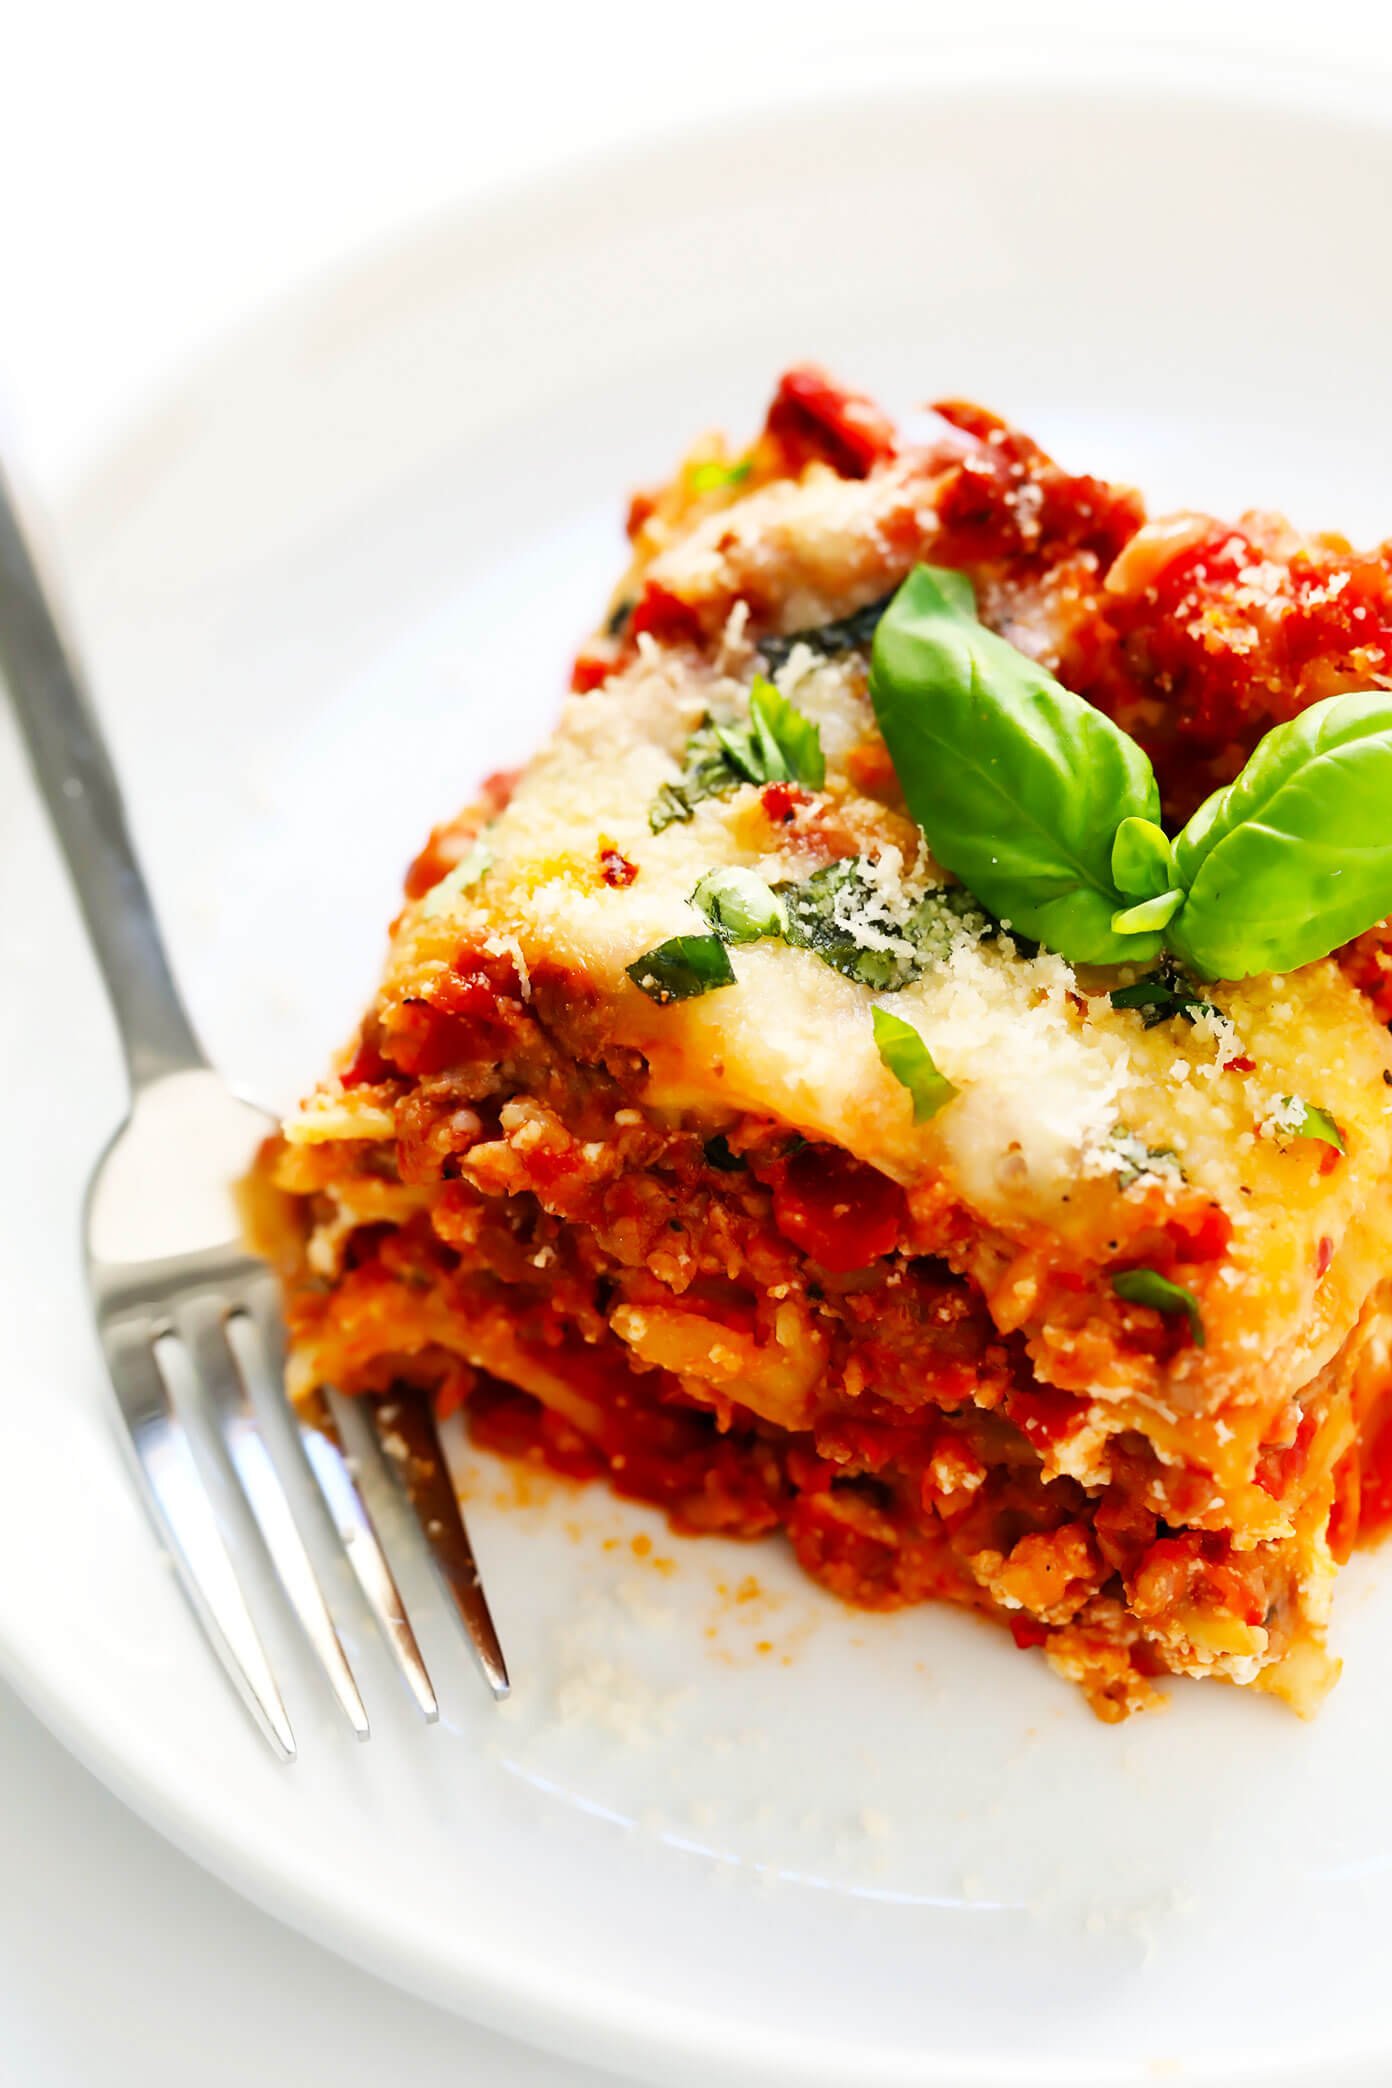 which supermarket does the best lasagna